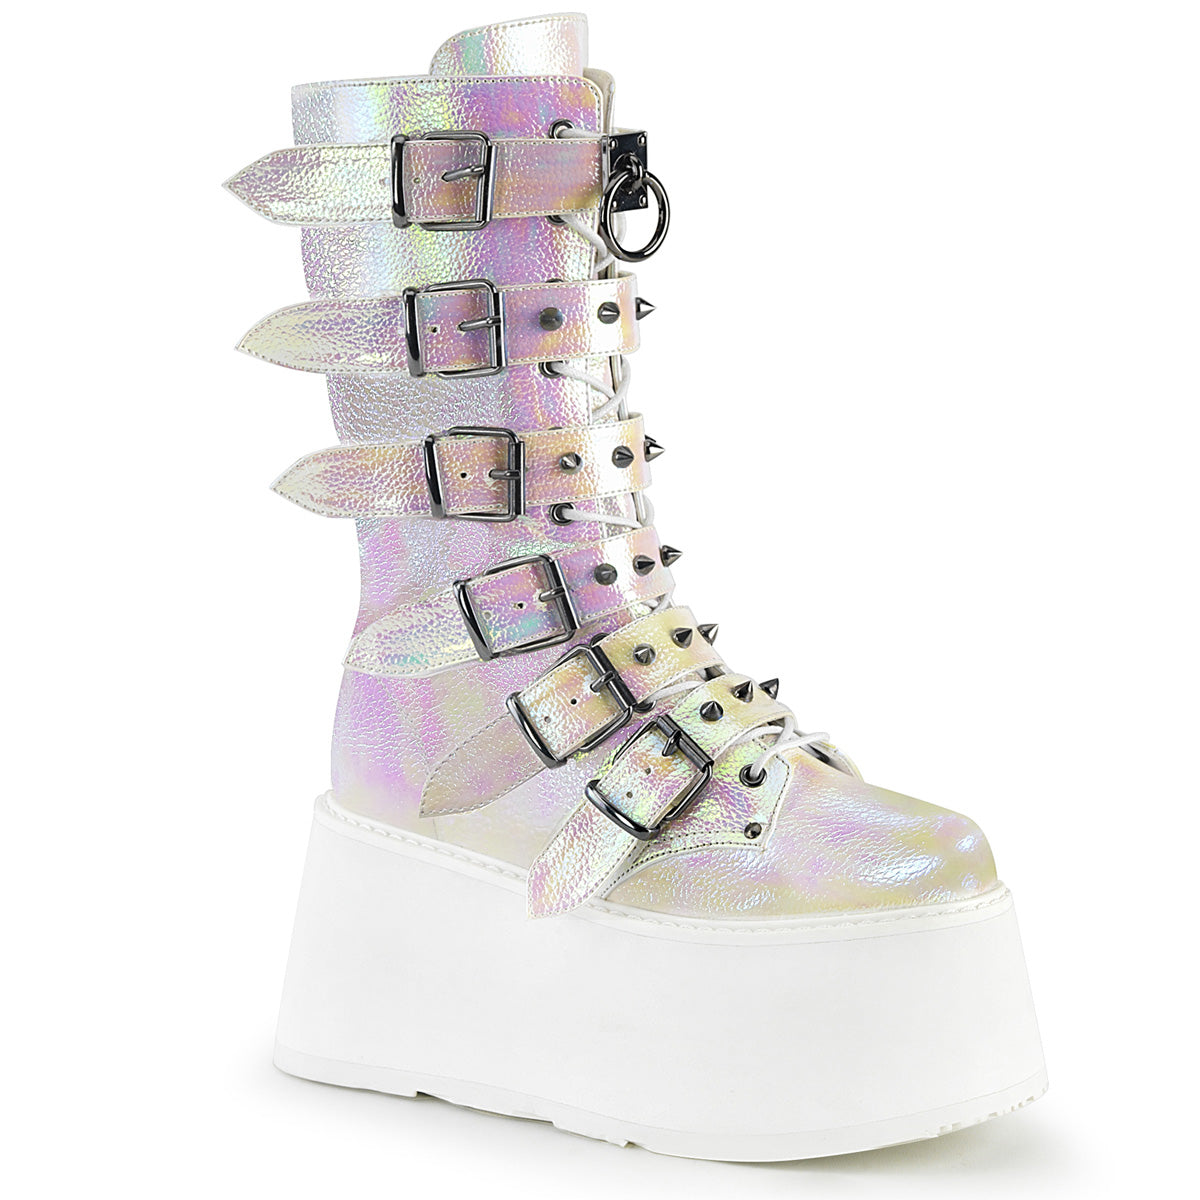 DemoniaCult Womens Boots DAMNED-225 Pearl Iridescent Vegan Leather